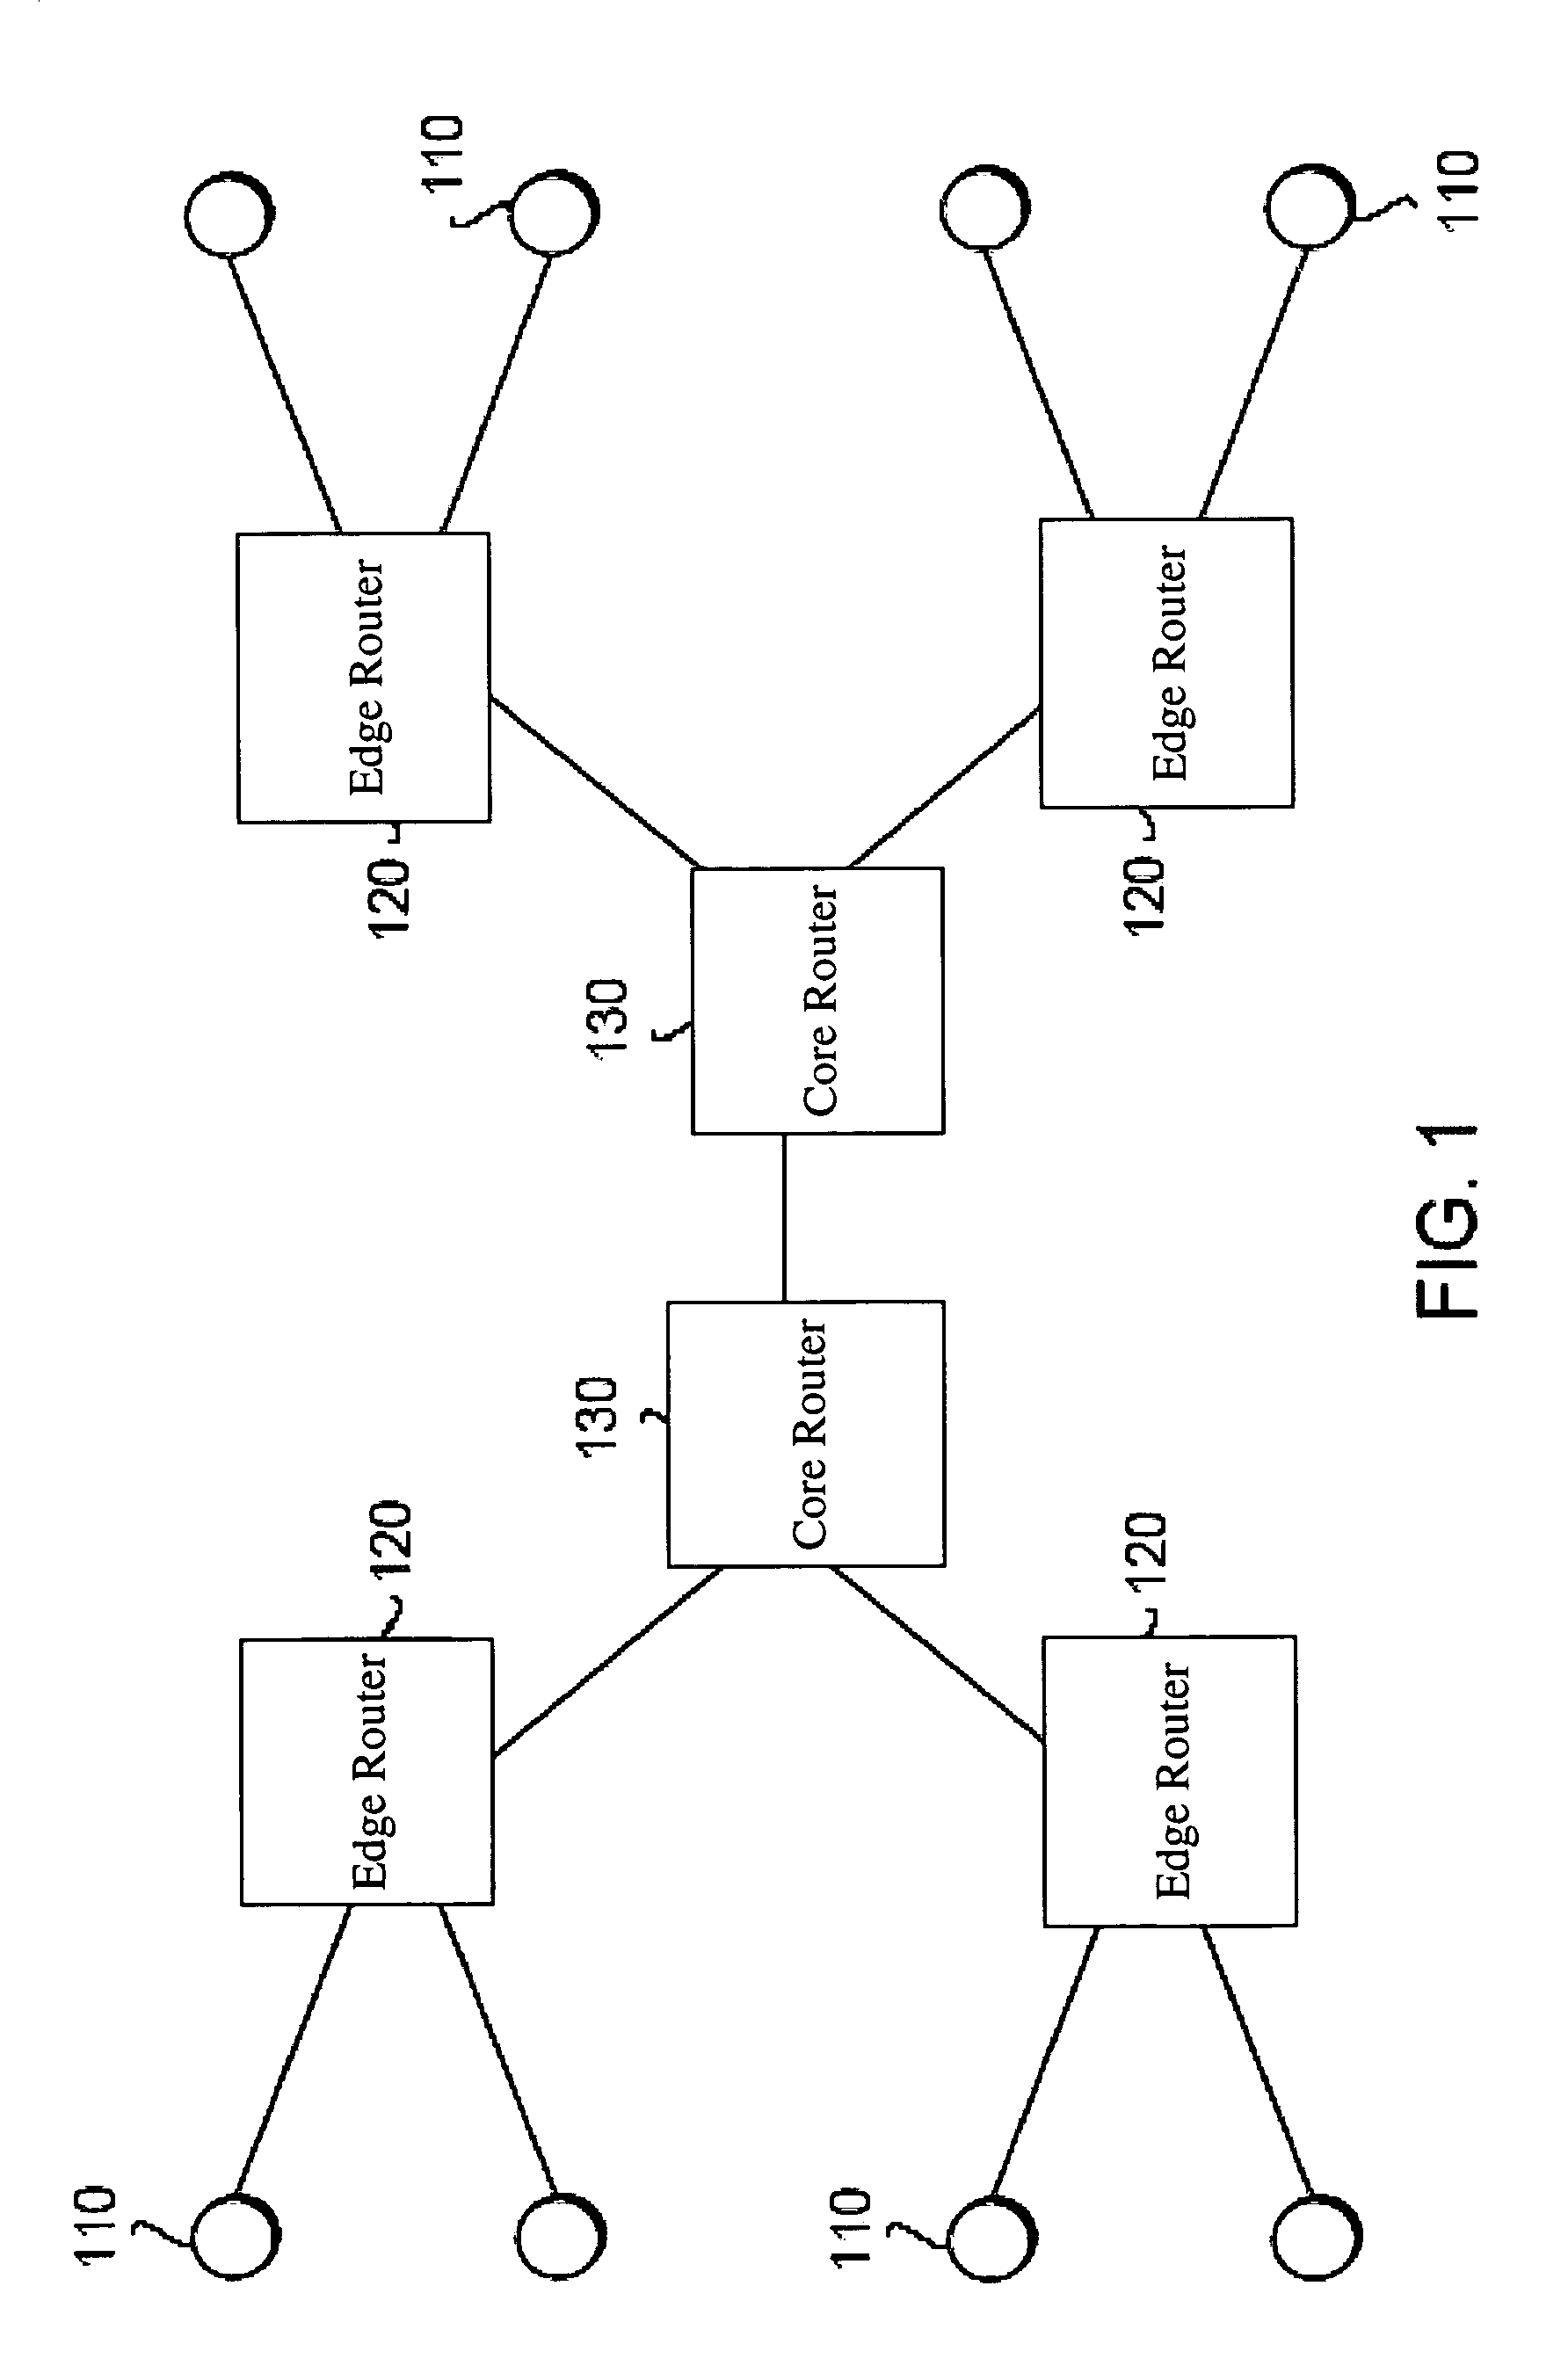 Adaptive-weighted packet scheduler for supporting premium service in a communications network